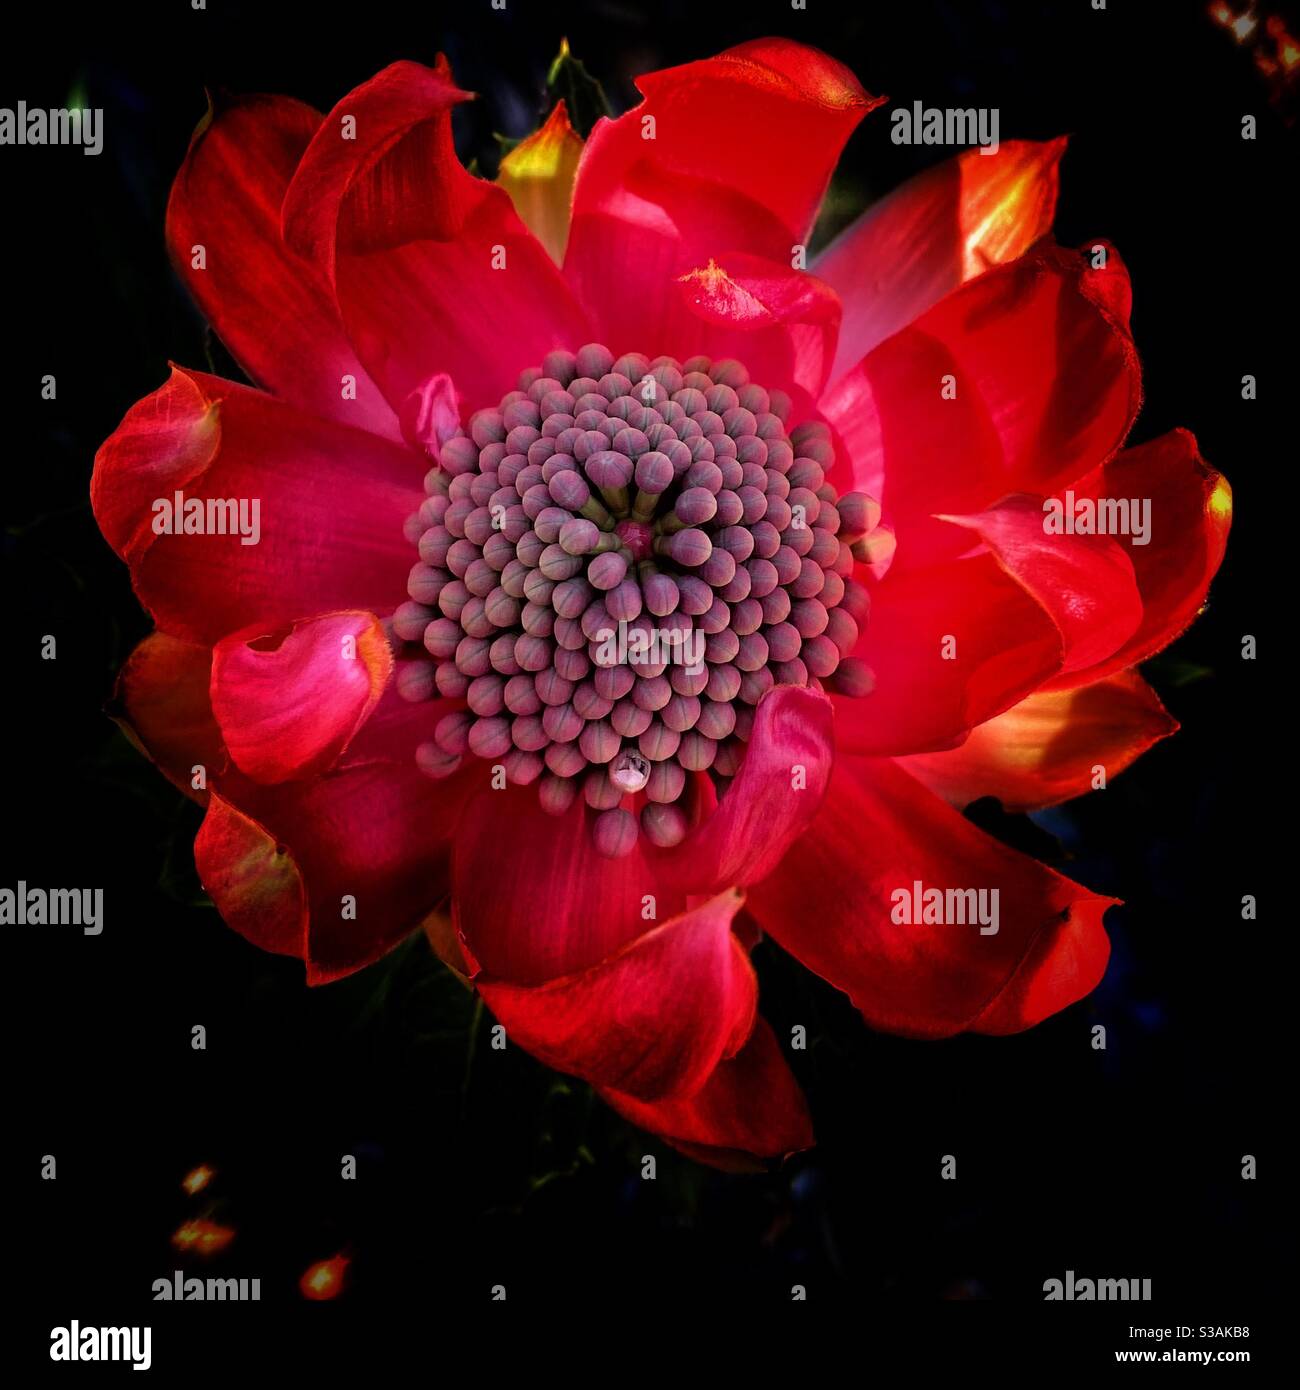 Native Australian flower, red New South Wales Waratah Telopea, close-up from above with black background. Waratah the state flower of NSW is recognised by it bulbous and crimson flower head. Stock Photo